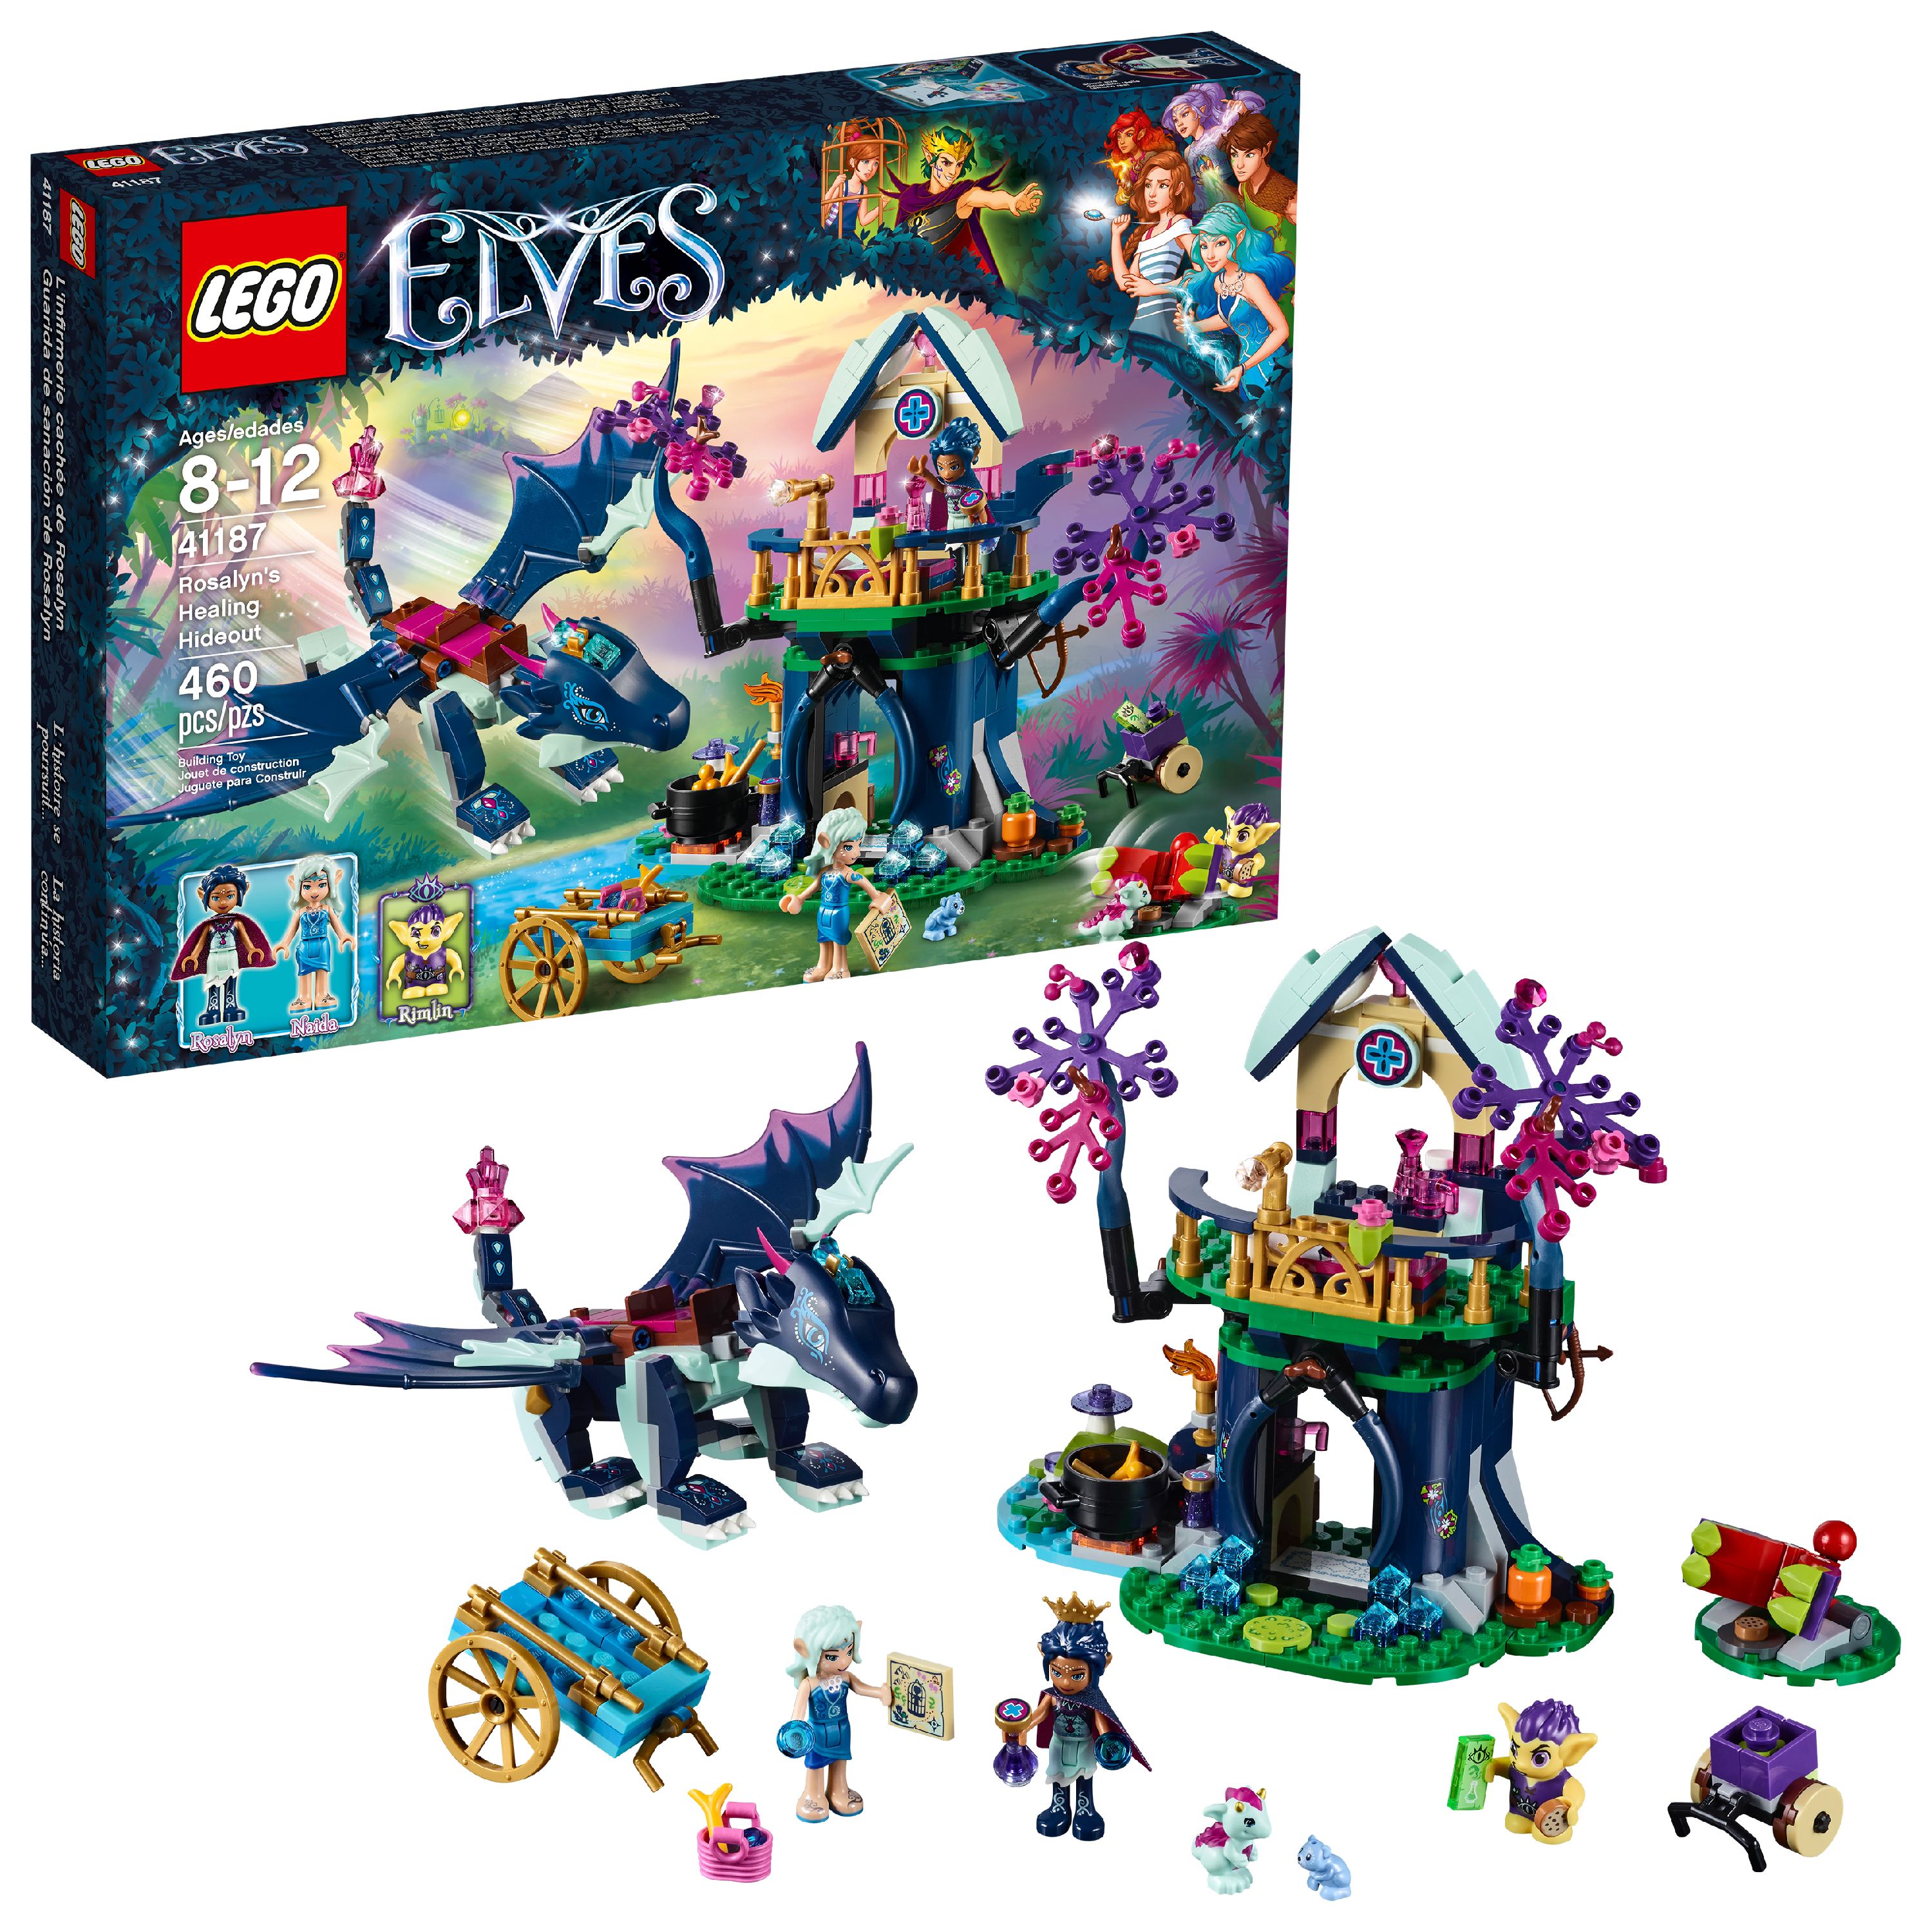 LEGO Elves Rosalyn's Healing Hideout 41187 (460 Pieces) - image 1 of 6